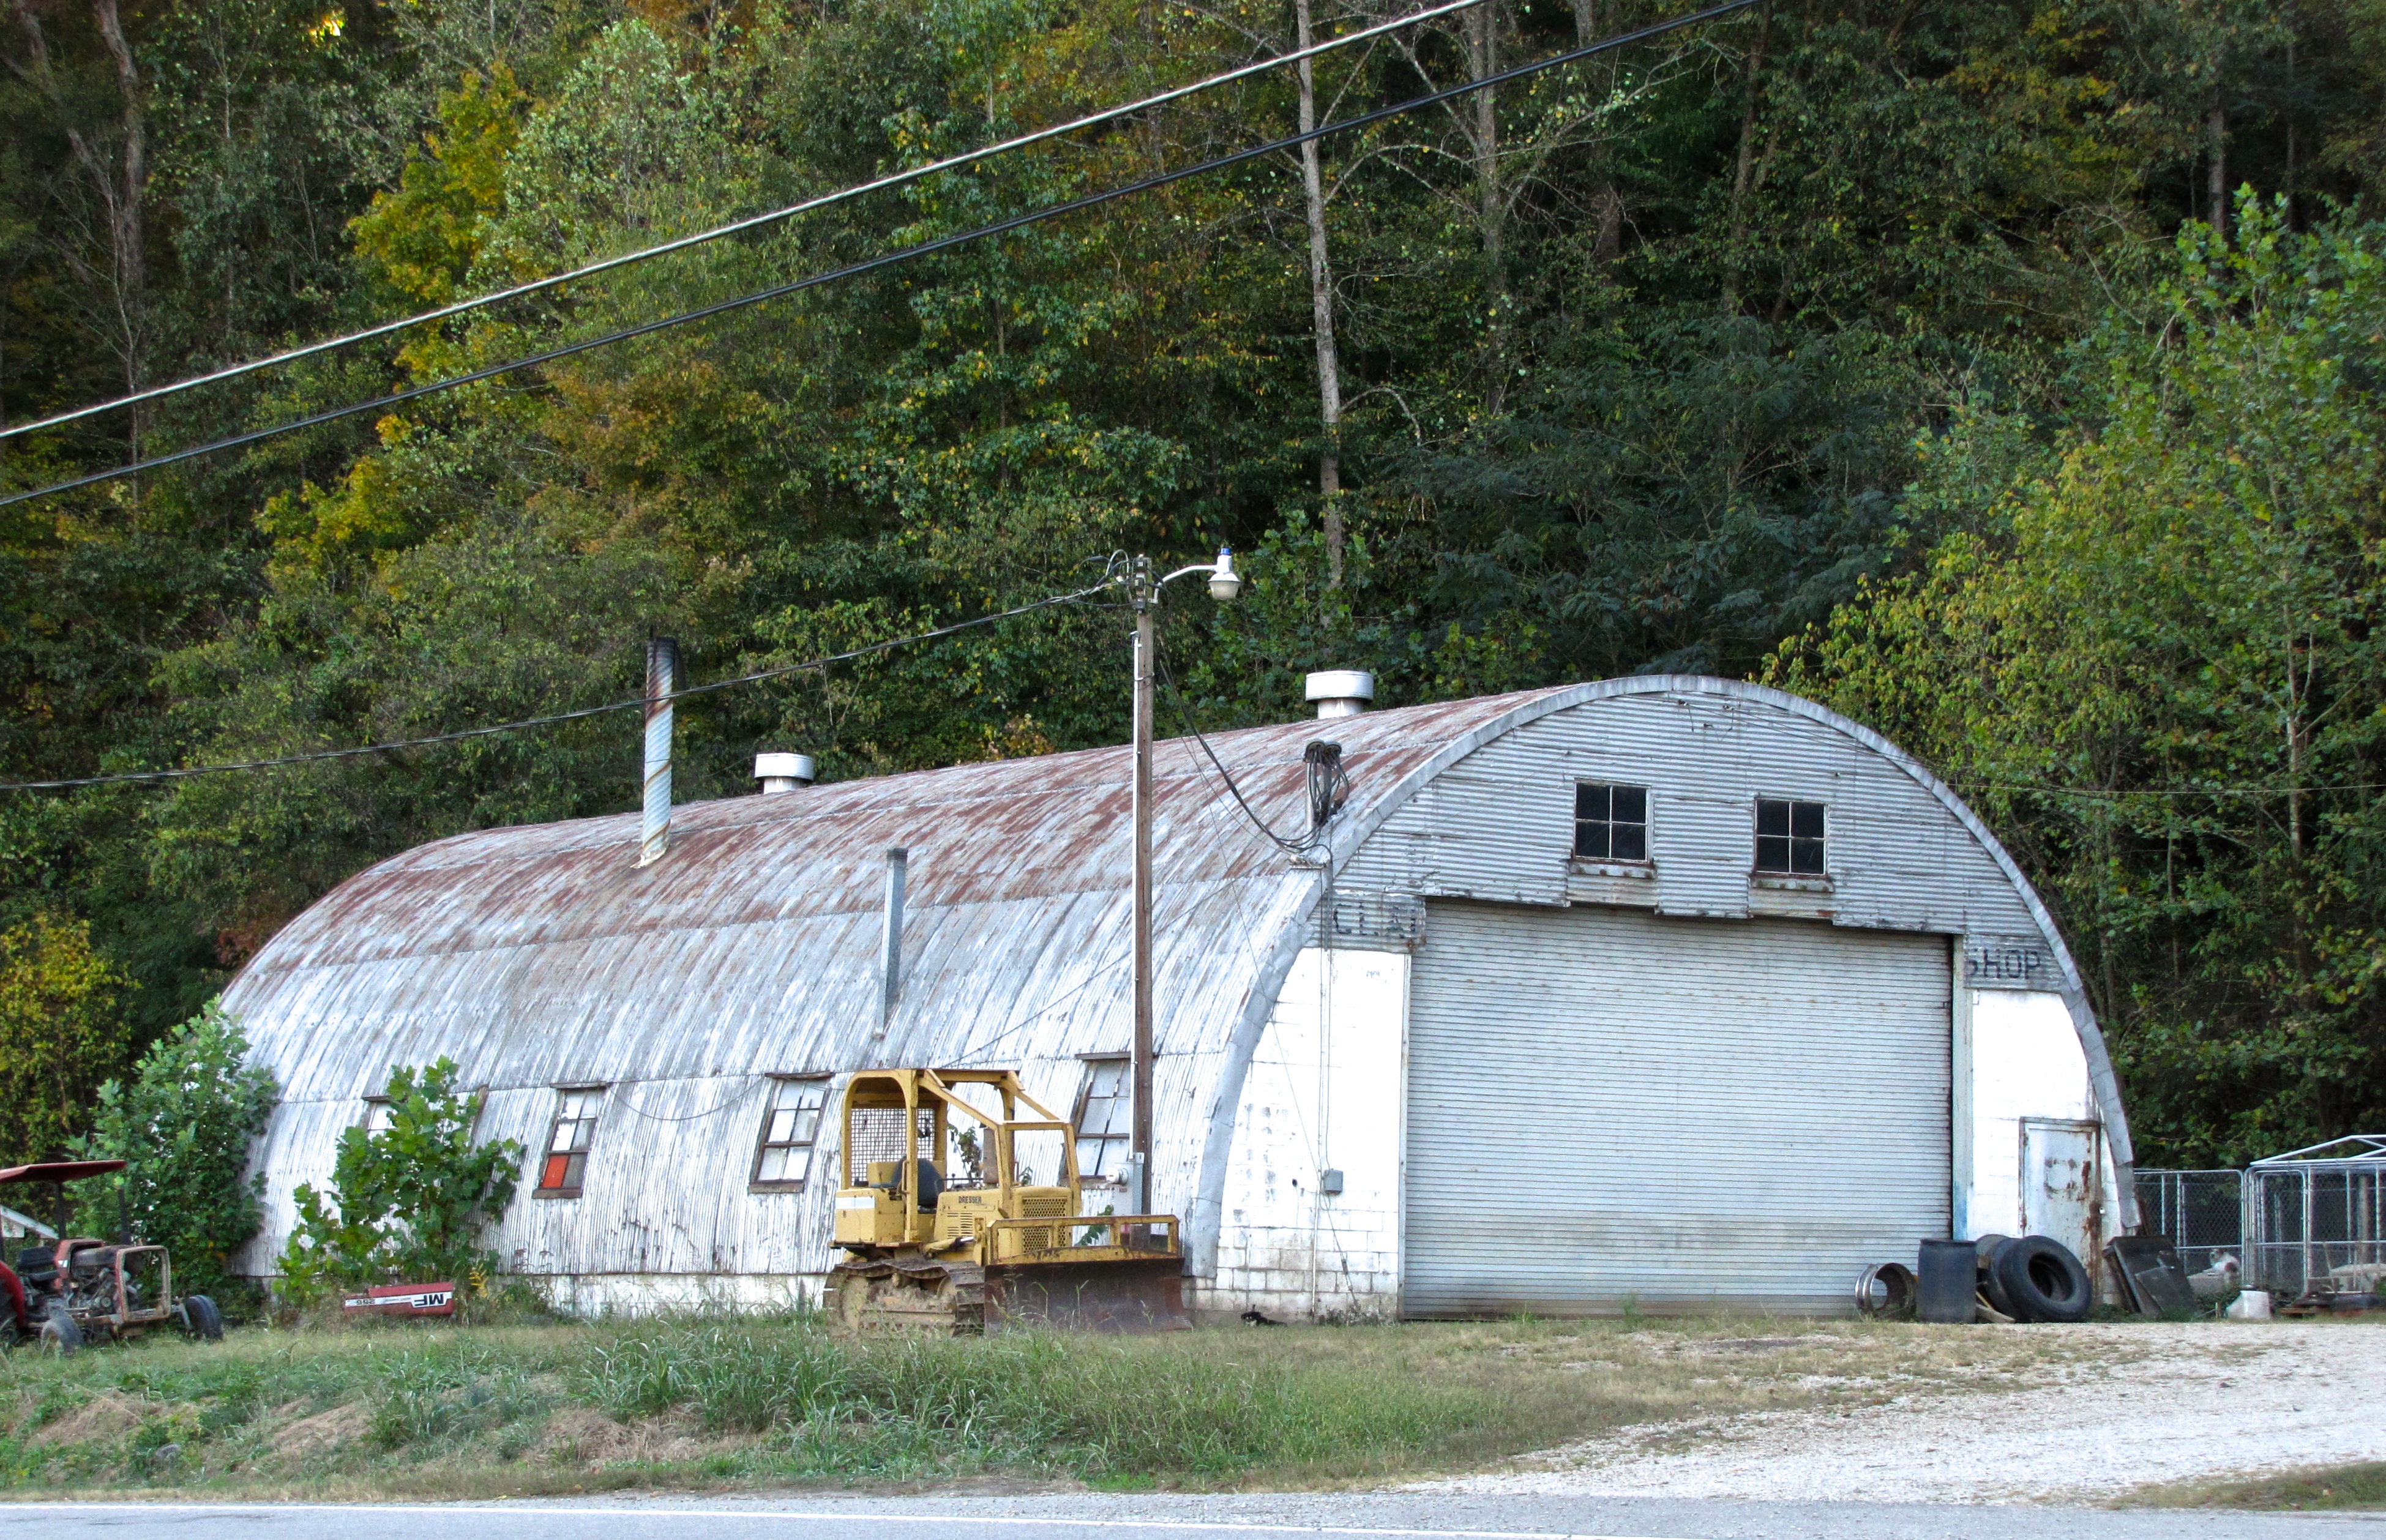 quonset hut in About Us, WA